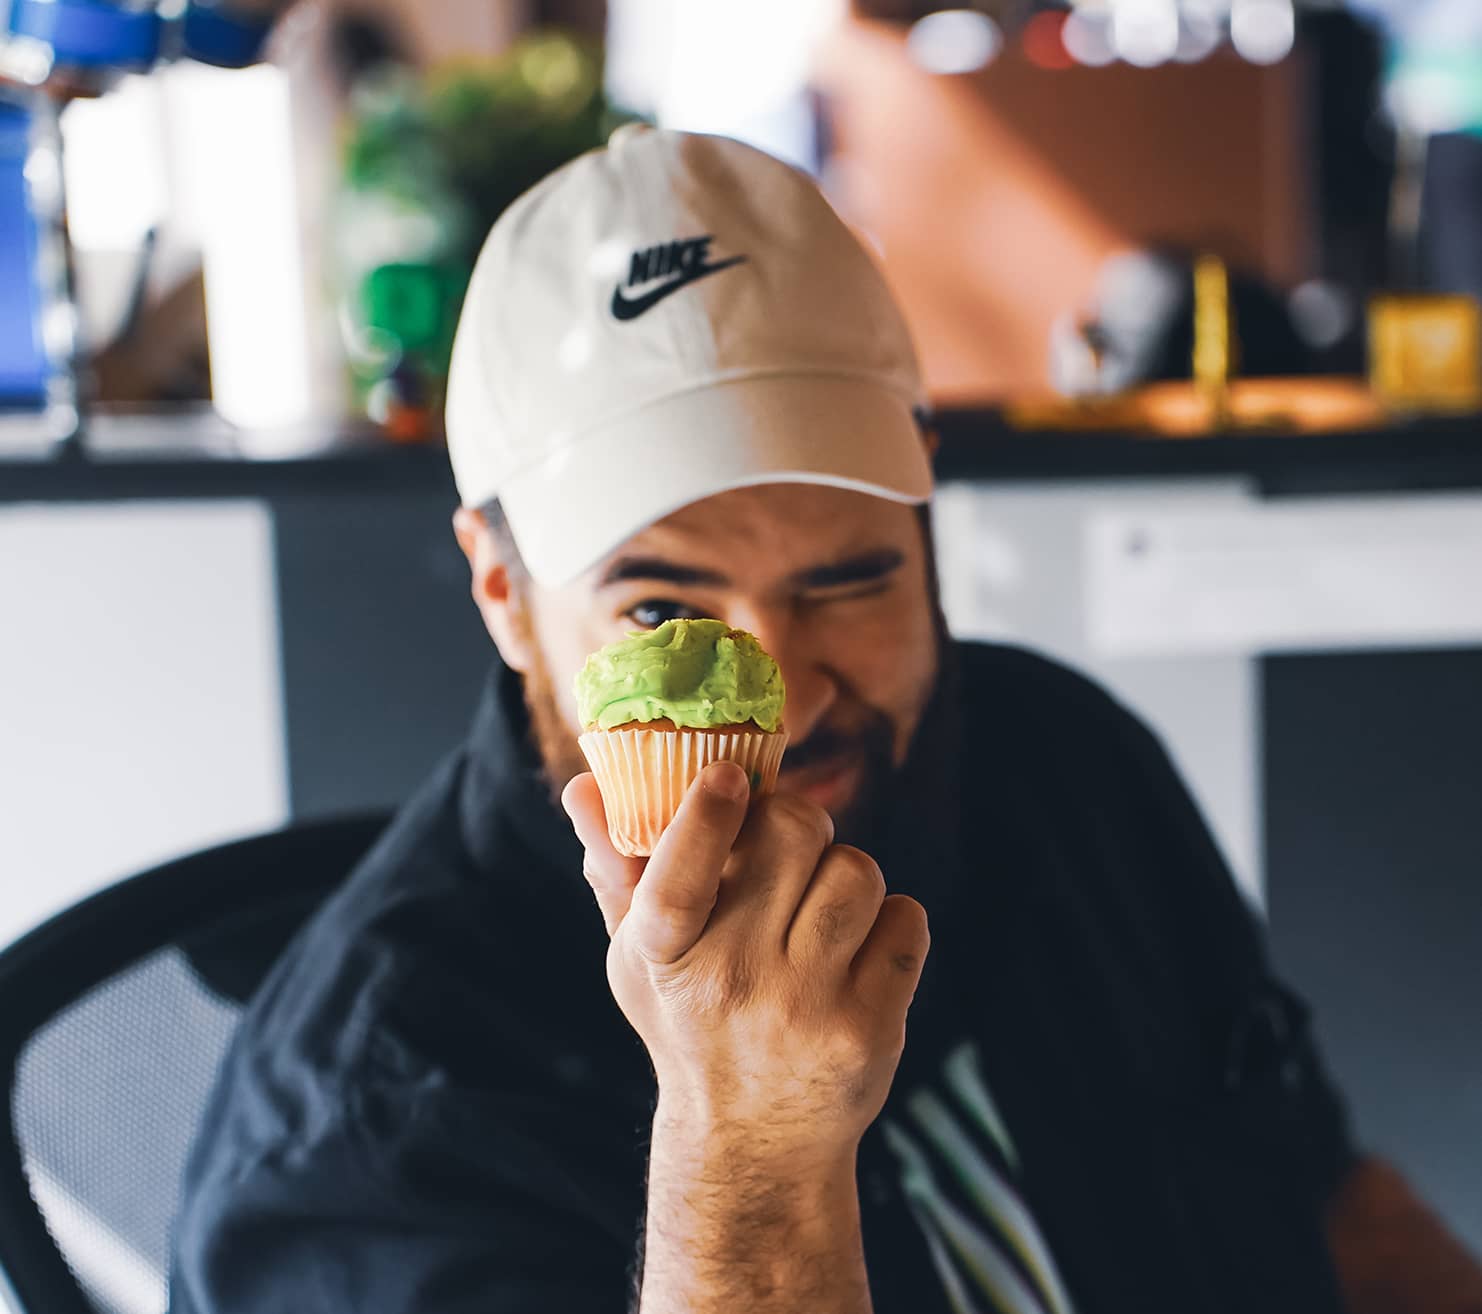 Shawn and the green cupcake